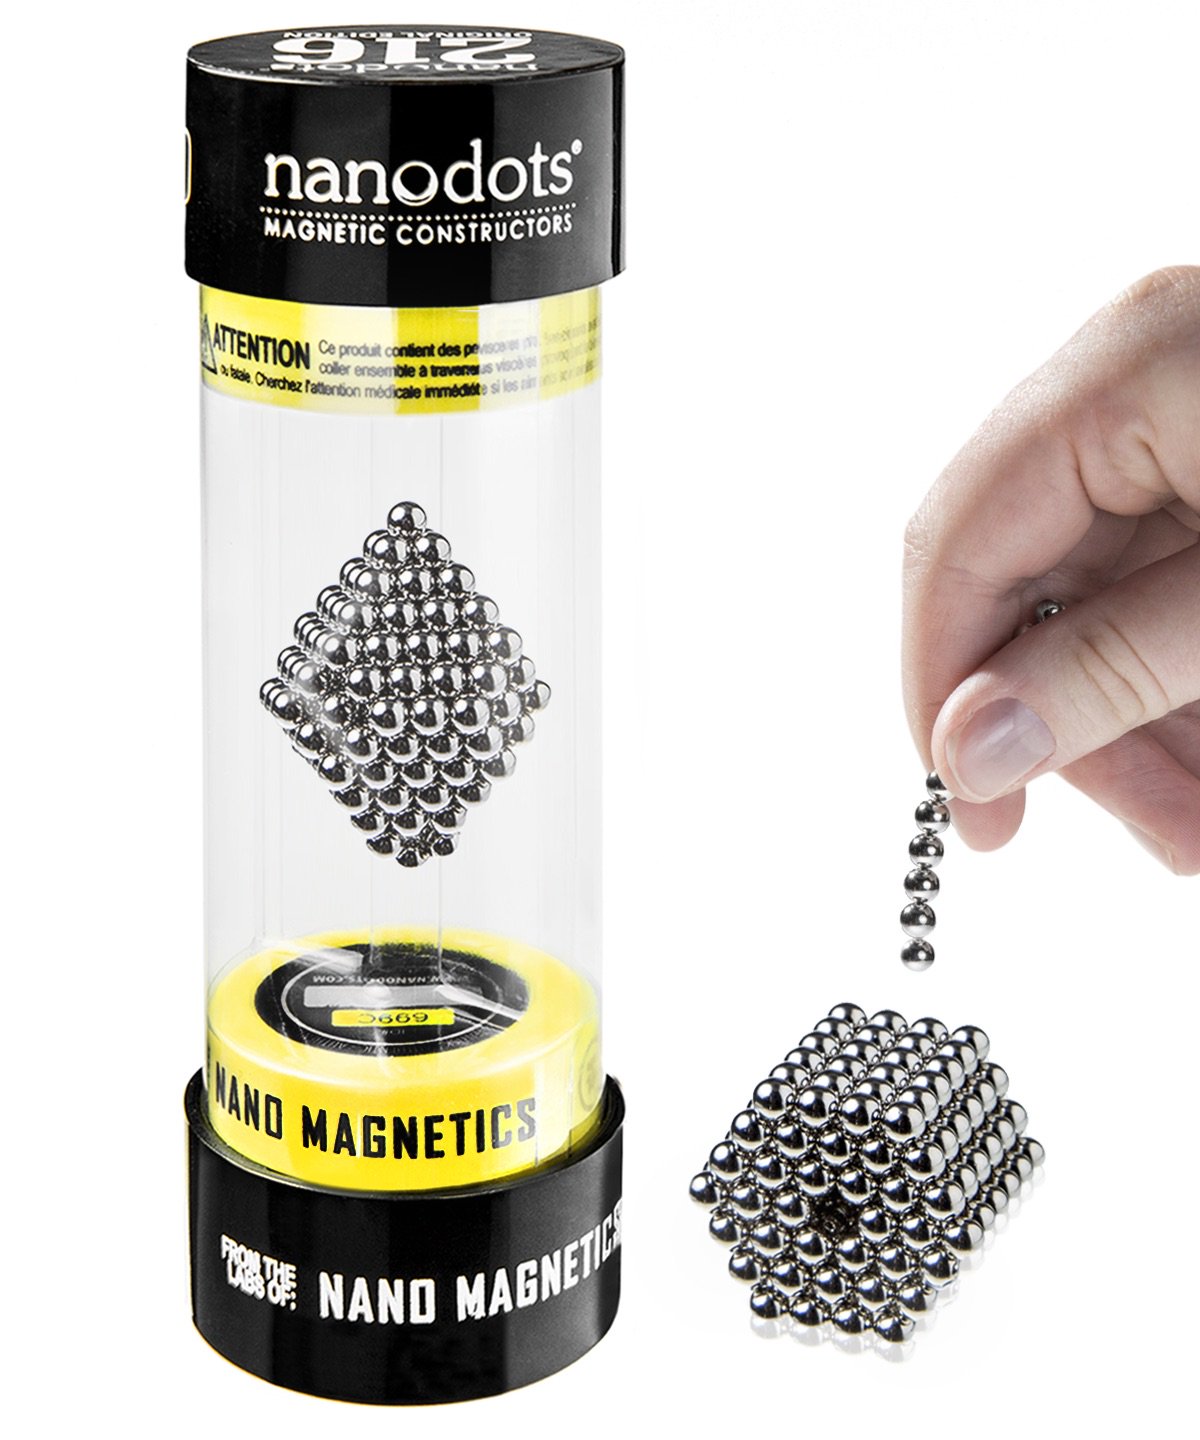 Vat19 on Twitter: "NanoDots are perfect for #fidgeting or as building blocks that snap together #NanoDots Get some here: https://t.co/HUP8PR62Be https://t.co/XS8IMV7xVL" /